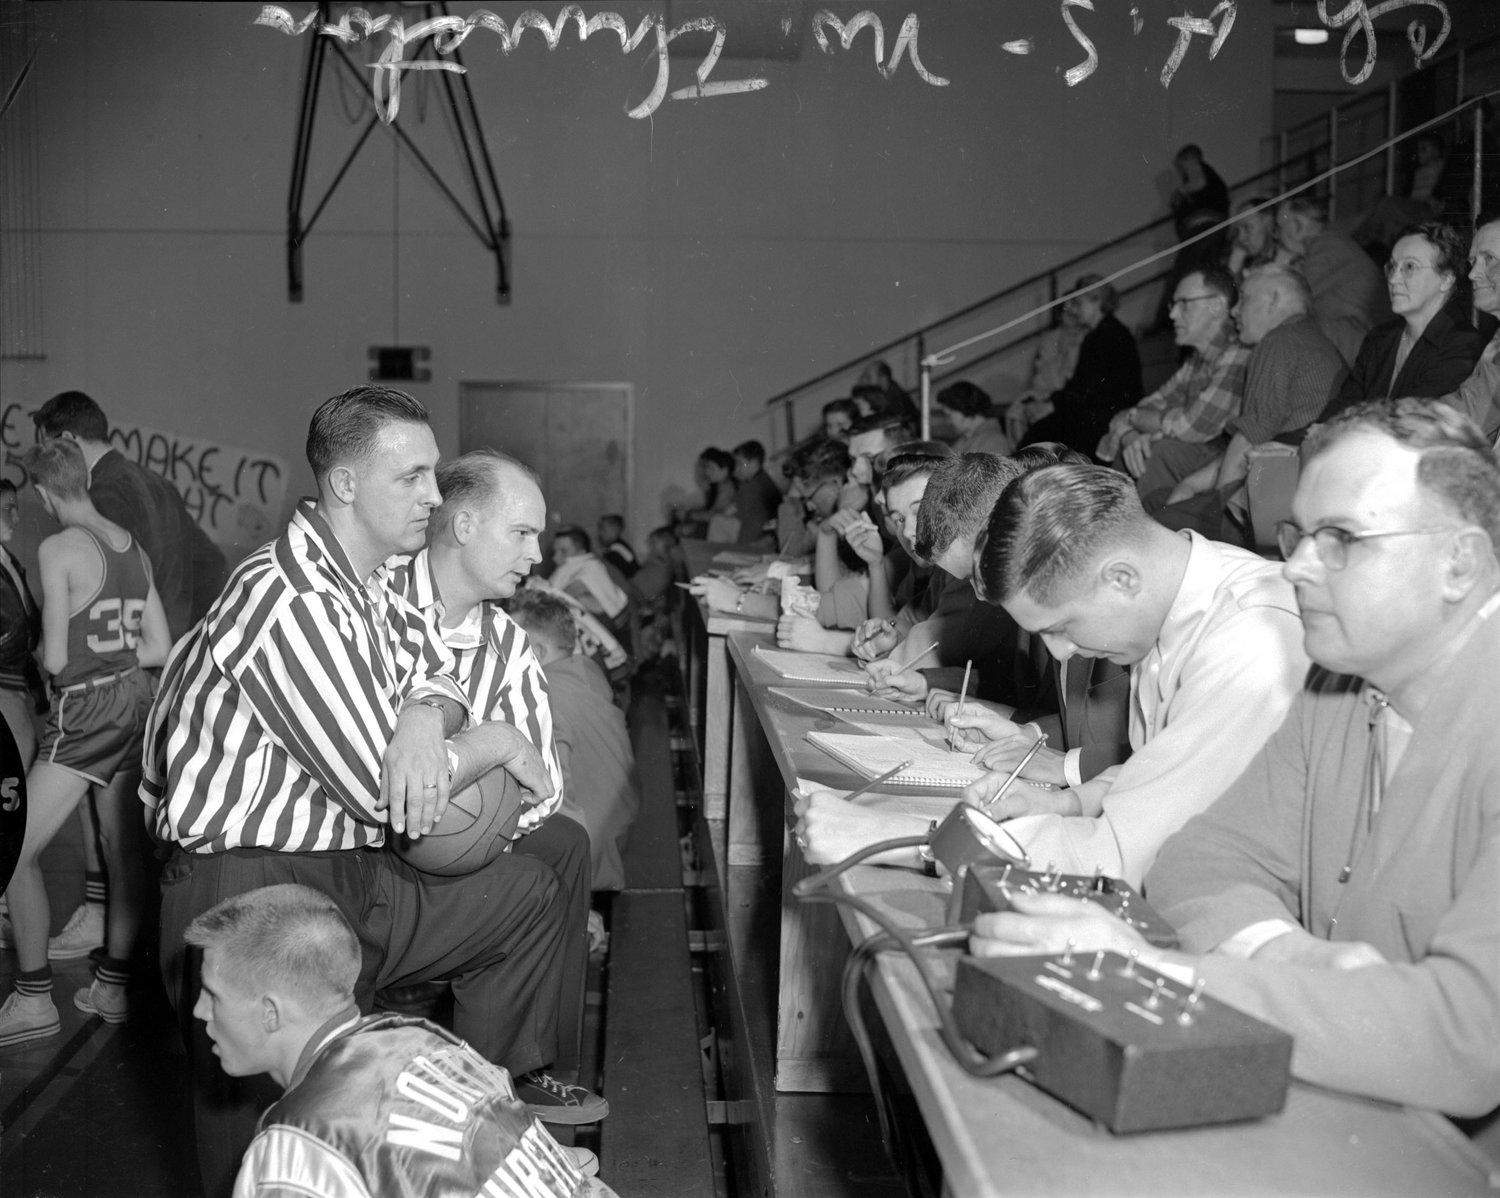 Today’s installment of photographs from The Chronicle’s recently digitized archives show images from the Chehalis High School basketball season in 1955 and 1956.  The Chronicle is working to convert decades worth of film into digital files in order to preserve them and share them with readers online and in each edition. Find more historical photos at chronline.com. If you have information on any of the photos published, please email details to news@chronline.com.